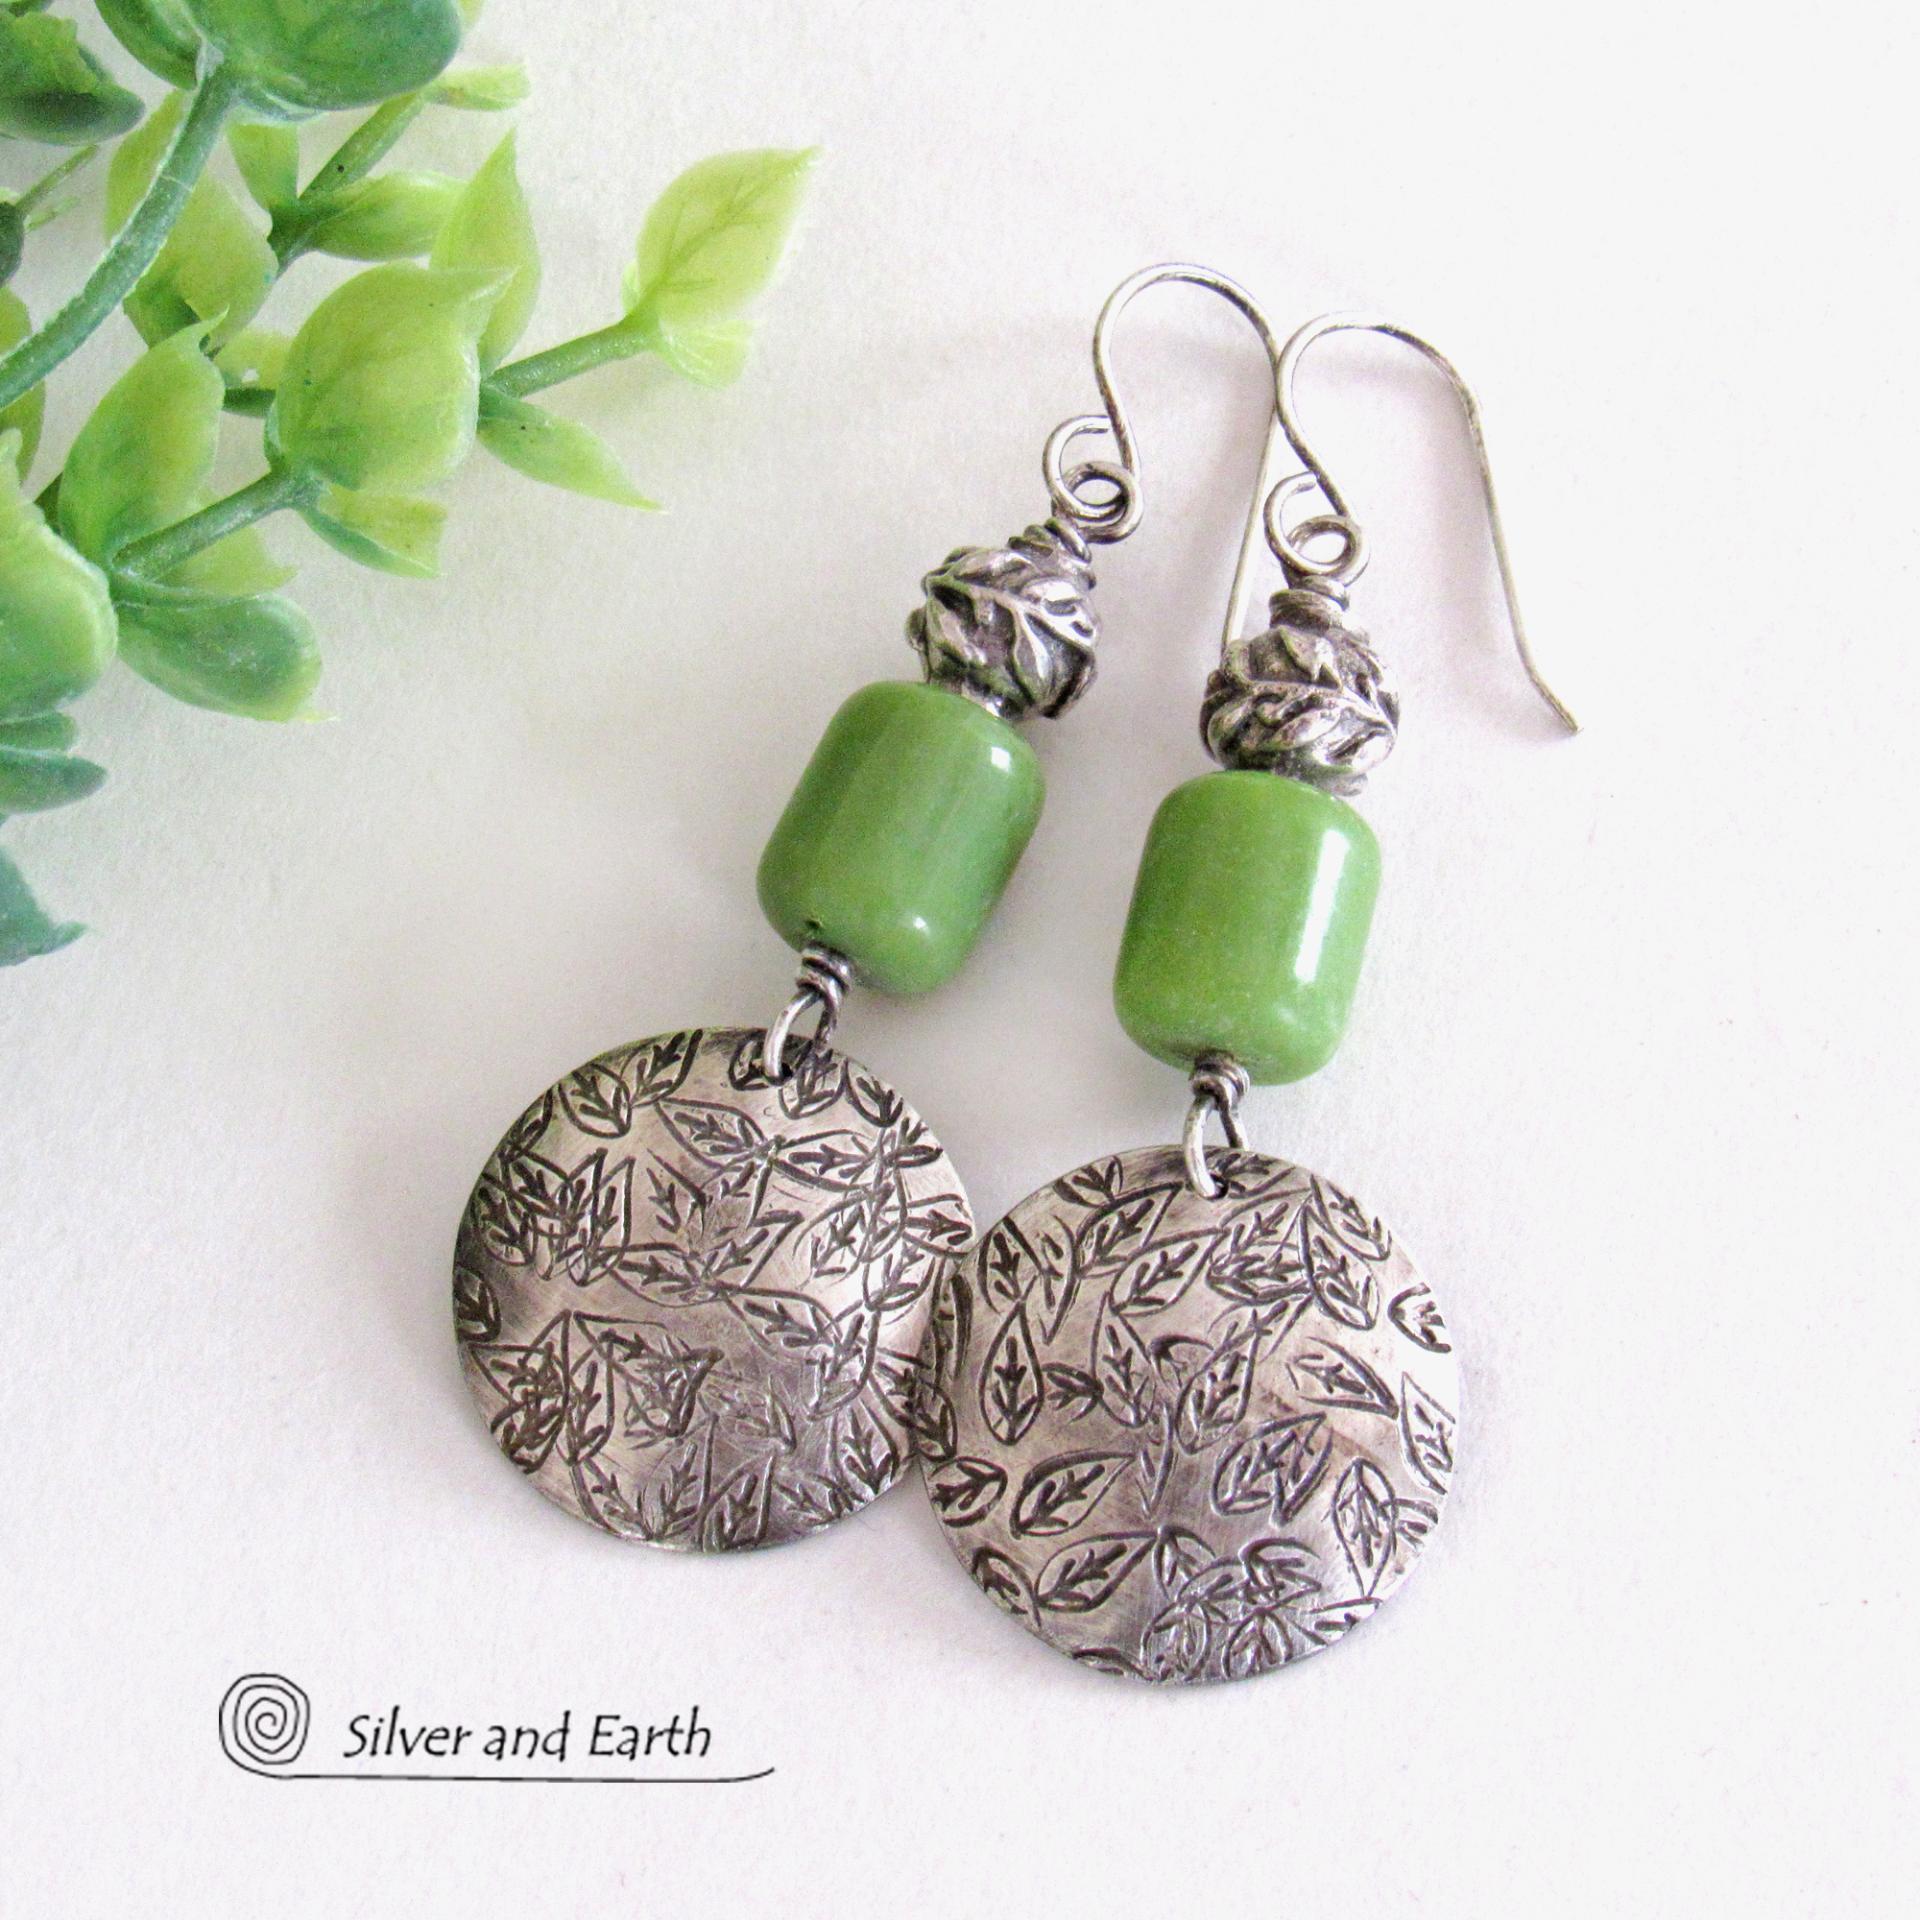 Hand Stamped Sterling Silver Leaf Earrings with Green Serpentine Stones - Unique Earthy Nature Jewelry Gifts for Women